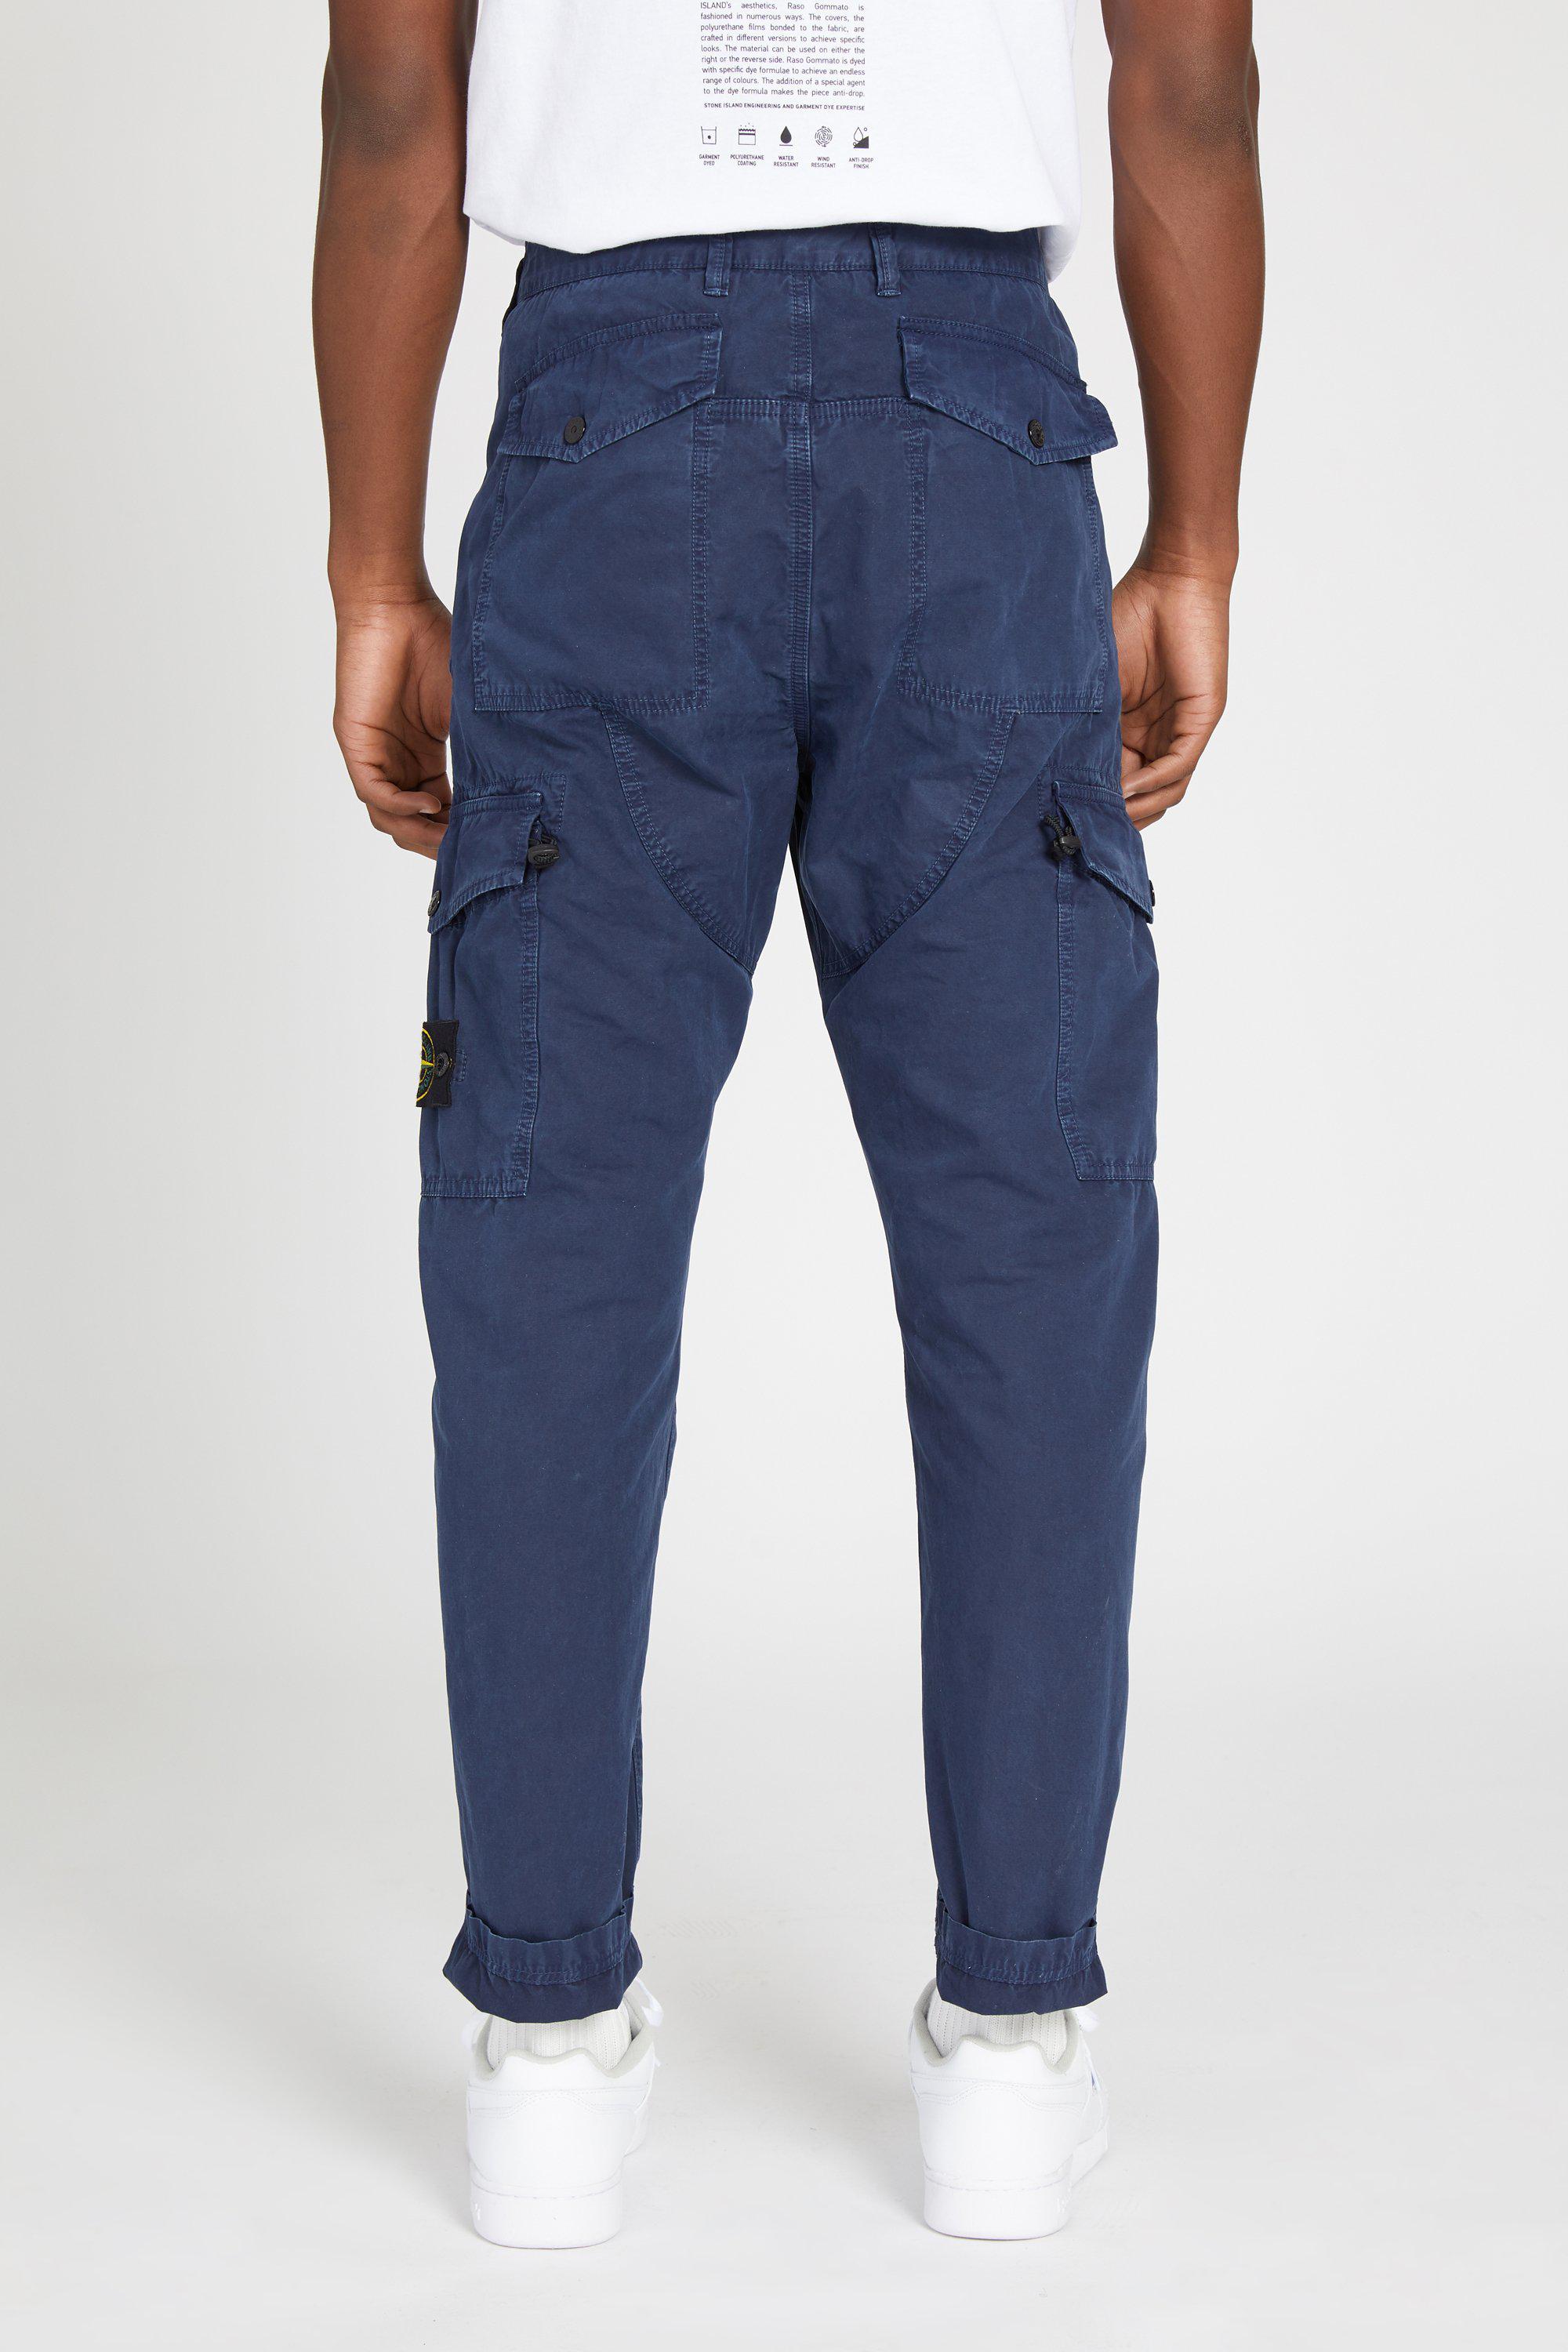 Stone Island 314wa Brushed Canvas Military Cargo Pants in Navy (Blue) for Men - Lyst